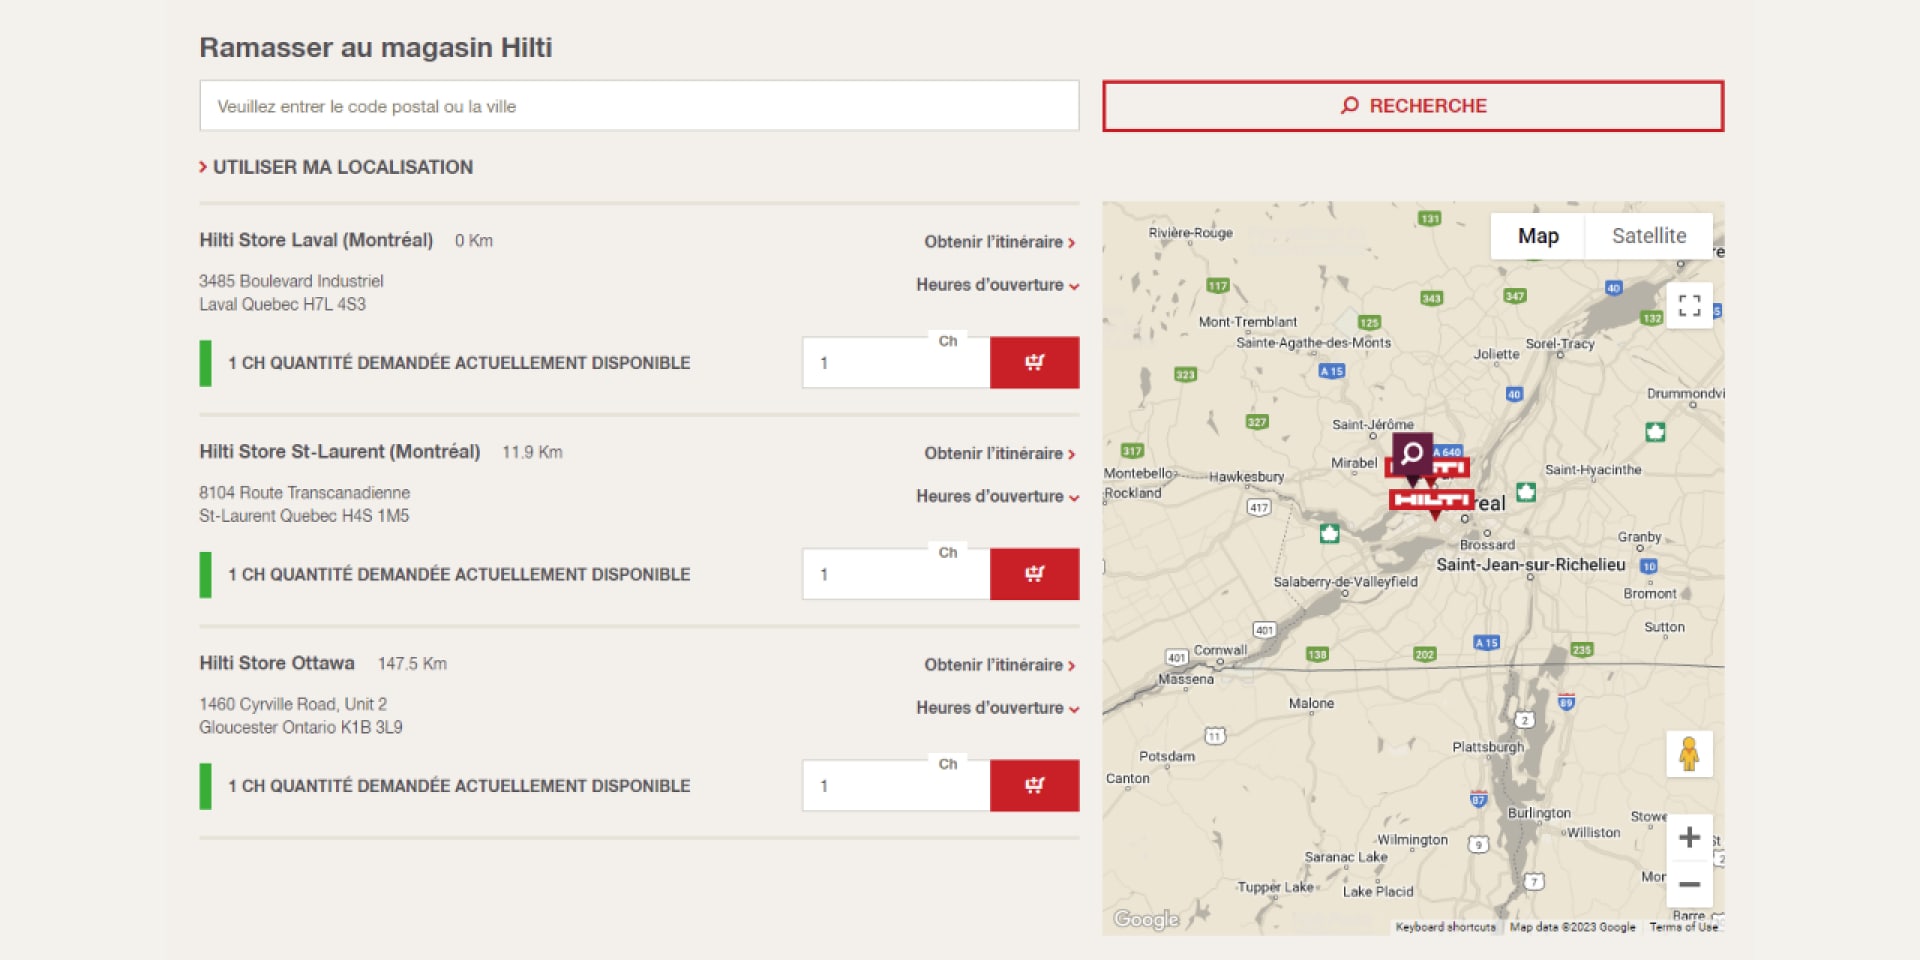 how to check stock for picking up an order at a Hilti store